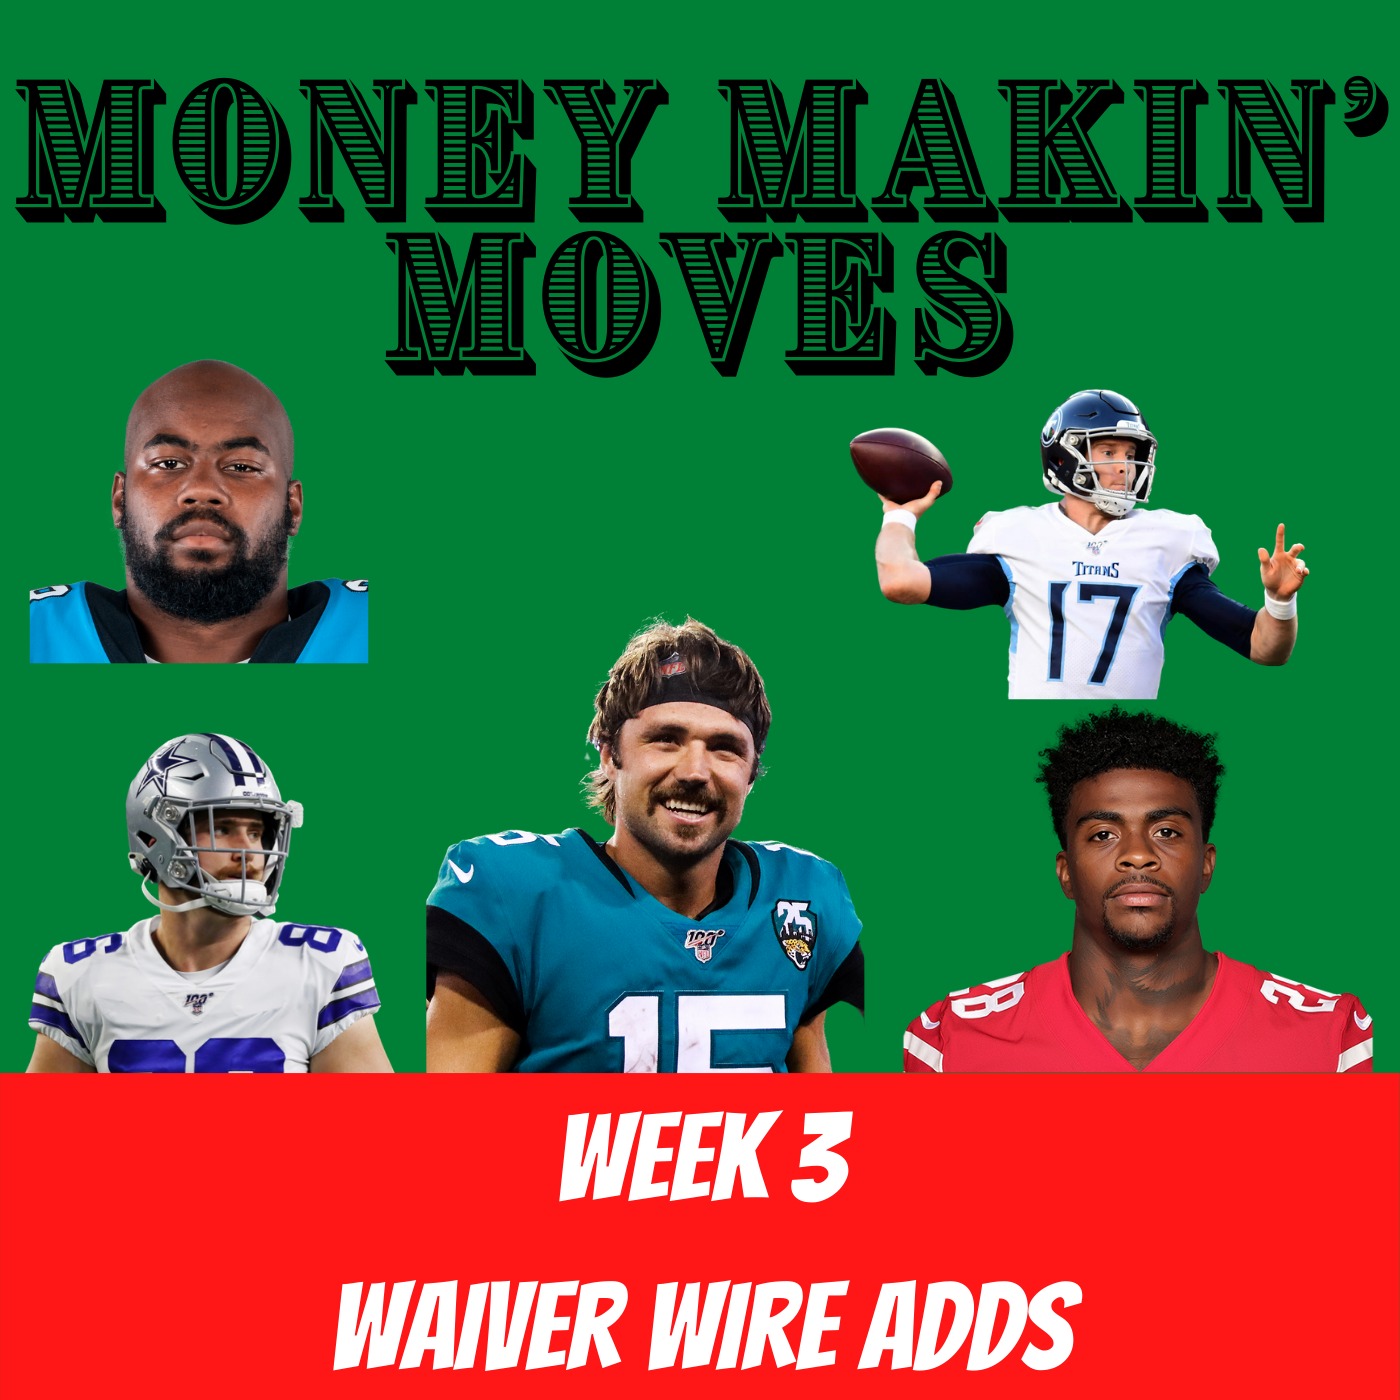 Week 3 Offensive Waiver Wire Adds | Money Makin' Moves Image